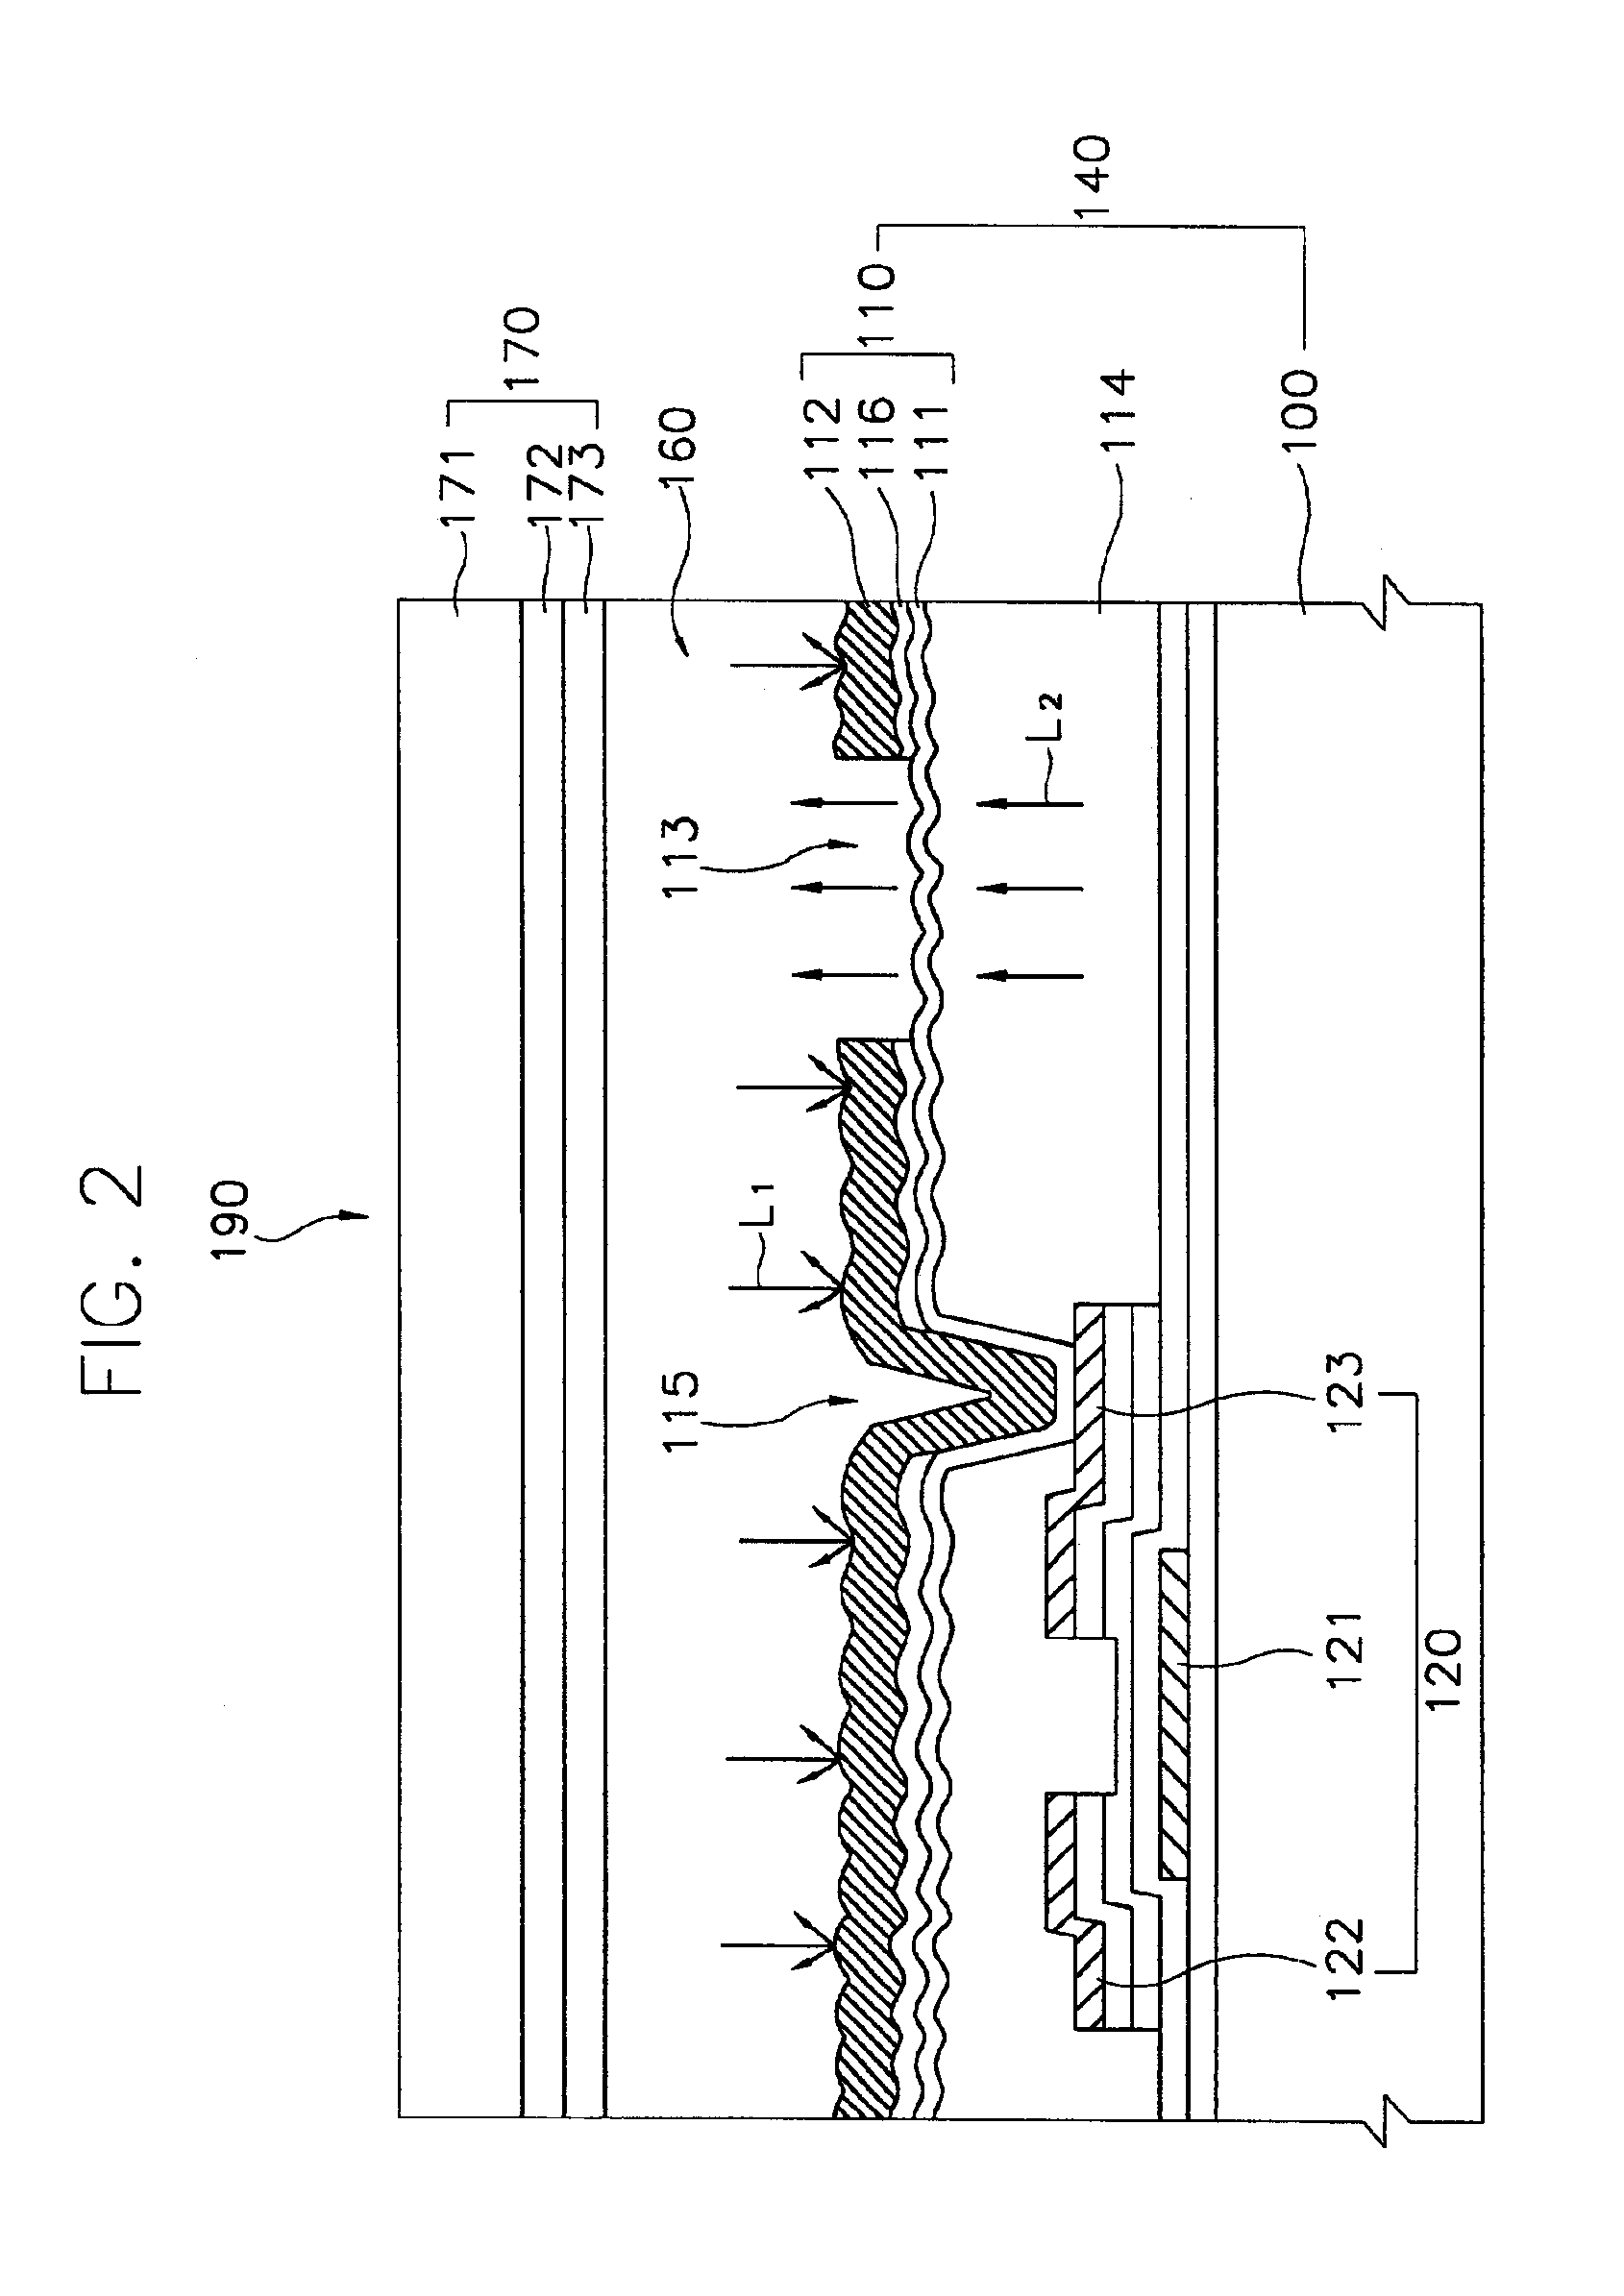 Transreflective liquid crystal display and method of manufacturing the same